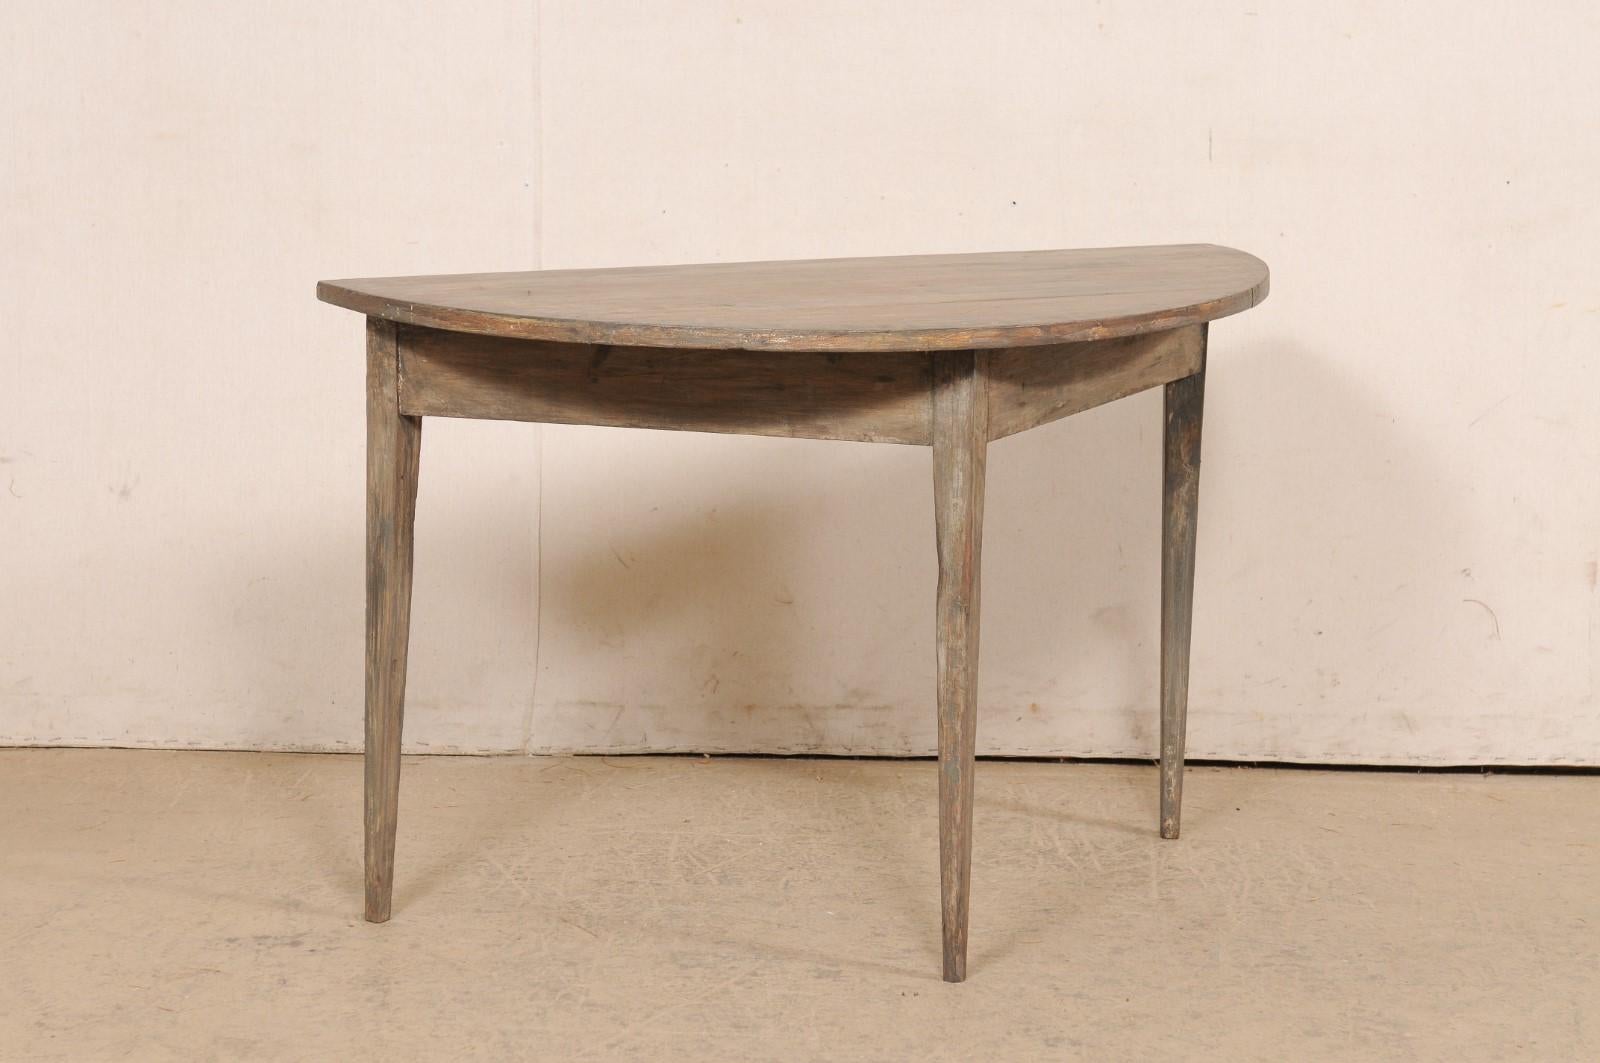 A Swedish single wooden demi-lune table from the turn of the 19th and 20th century. This antique table from Sweden features a semi-circular, or half moon top, over a triangular shaped apron. The skirt is clean and plain, and the piece is raised upon